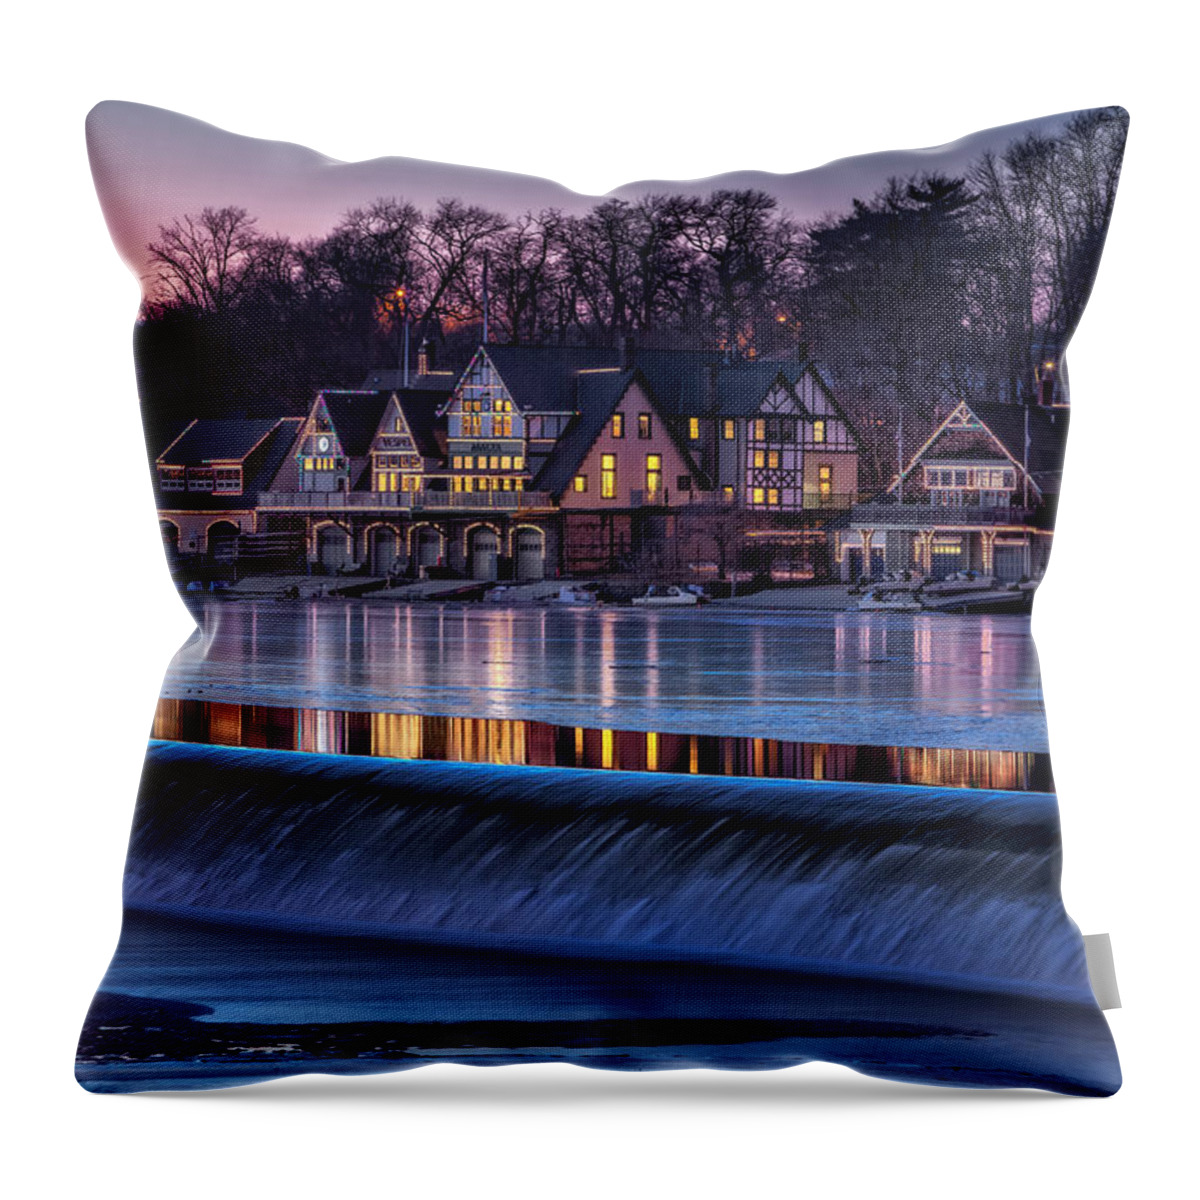 Boat House Row Throw Pillow featuring the photograph Boathouse Row by Susan Candelario